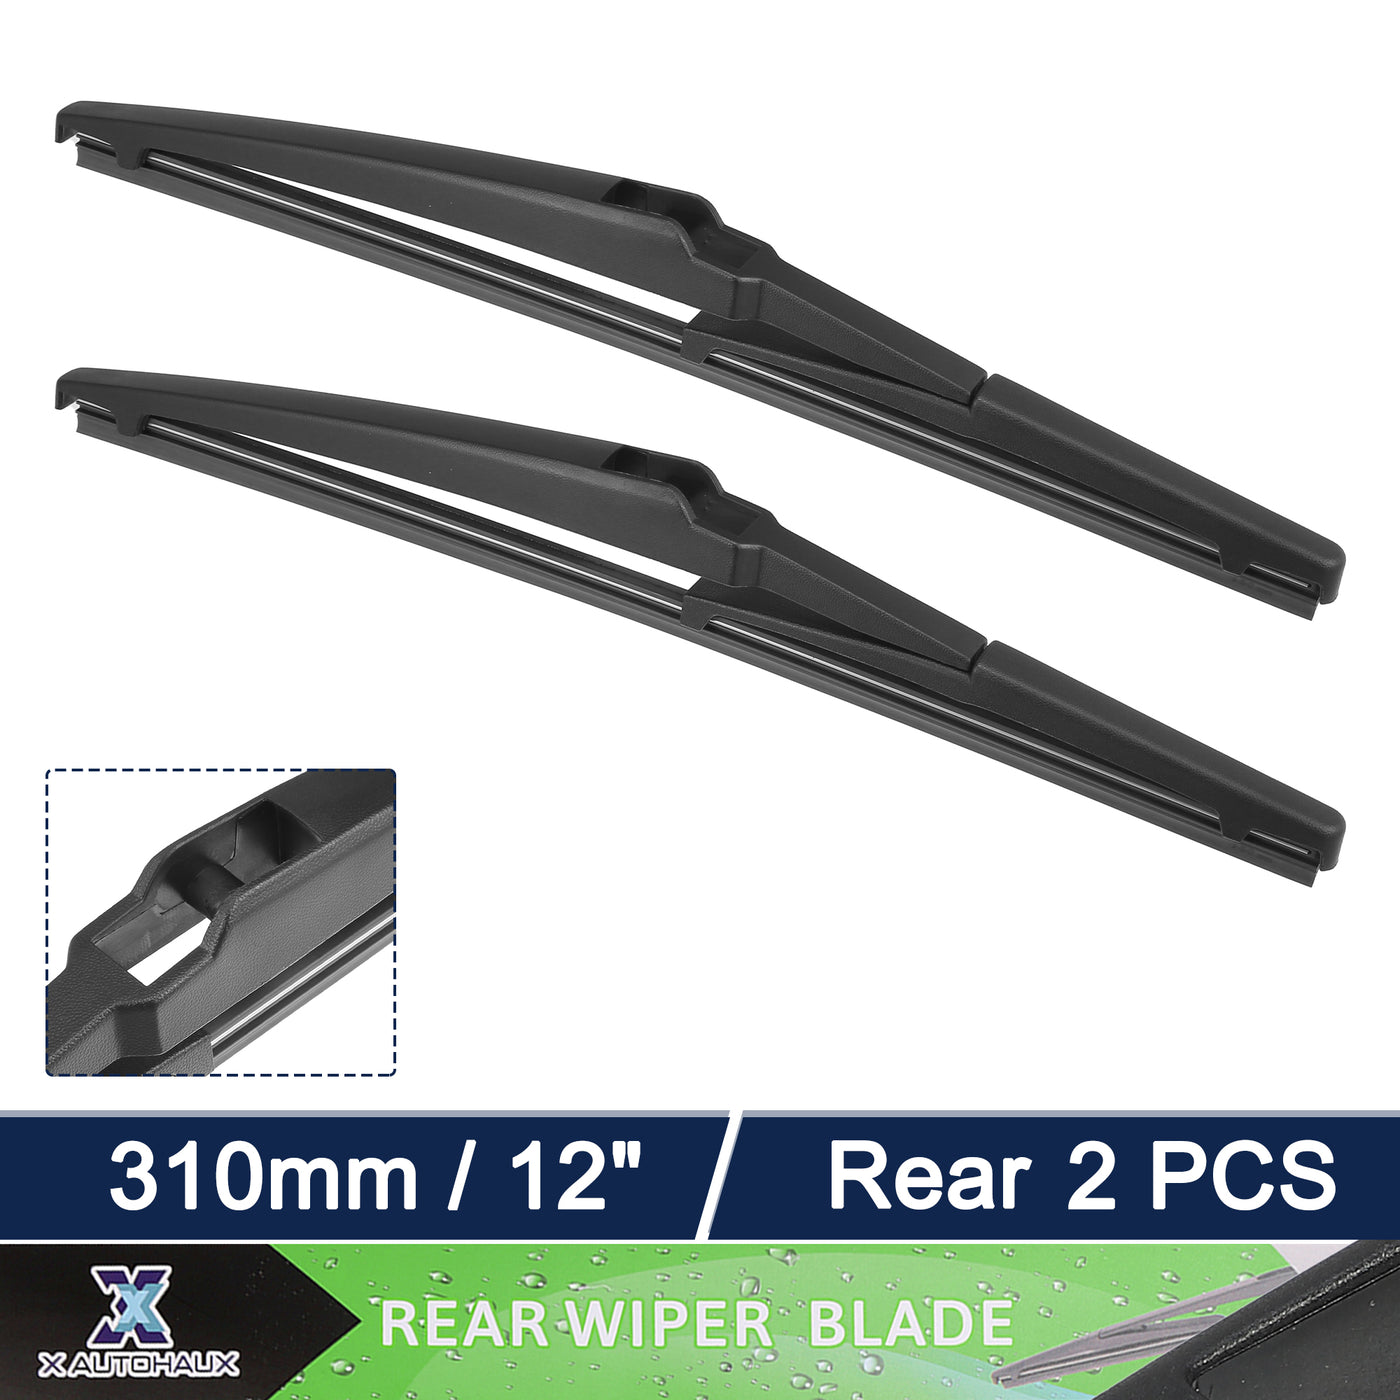 X AUTOHAUX 2pcs Rear Windshield Wiper Blade Replacement for Toyota Rav4 2000-2012 for Dodge Journey 2008-2016 for Jeep Grand Cherokee 2011-2016